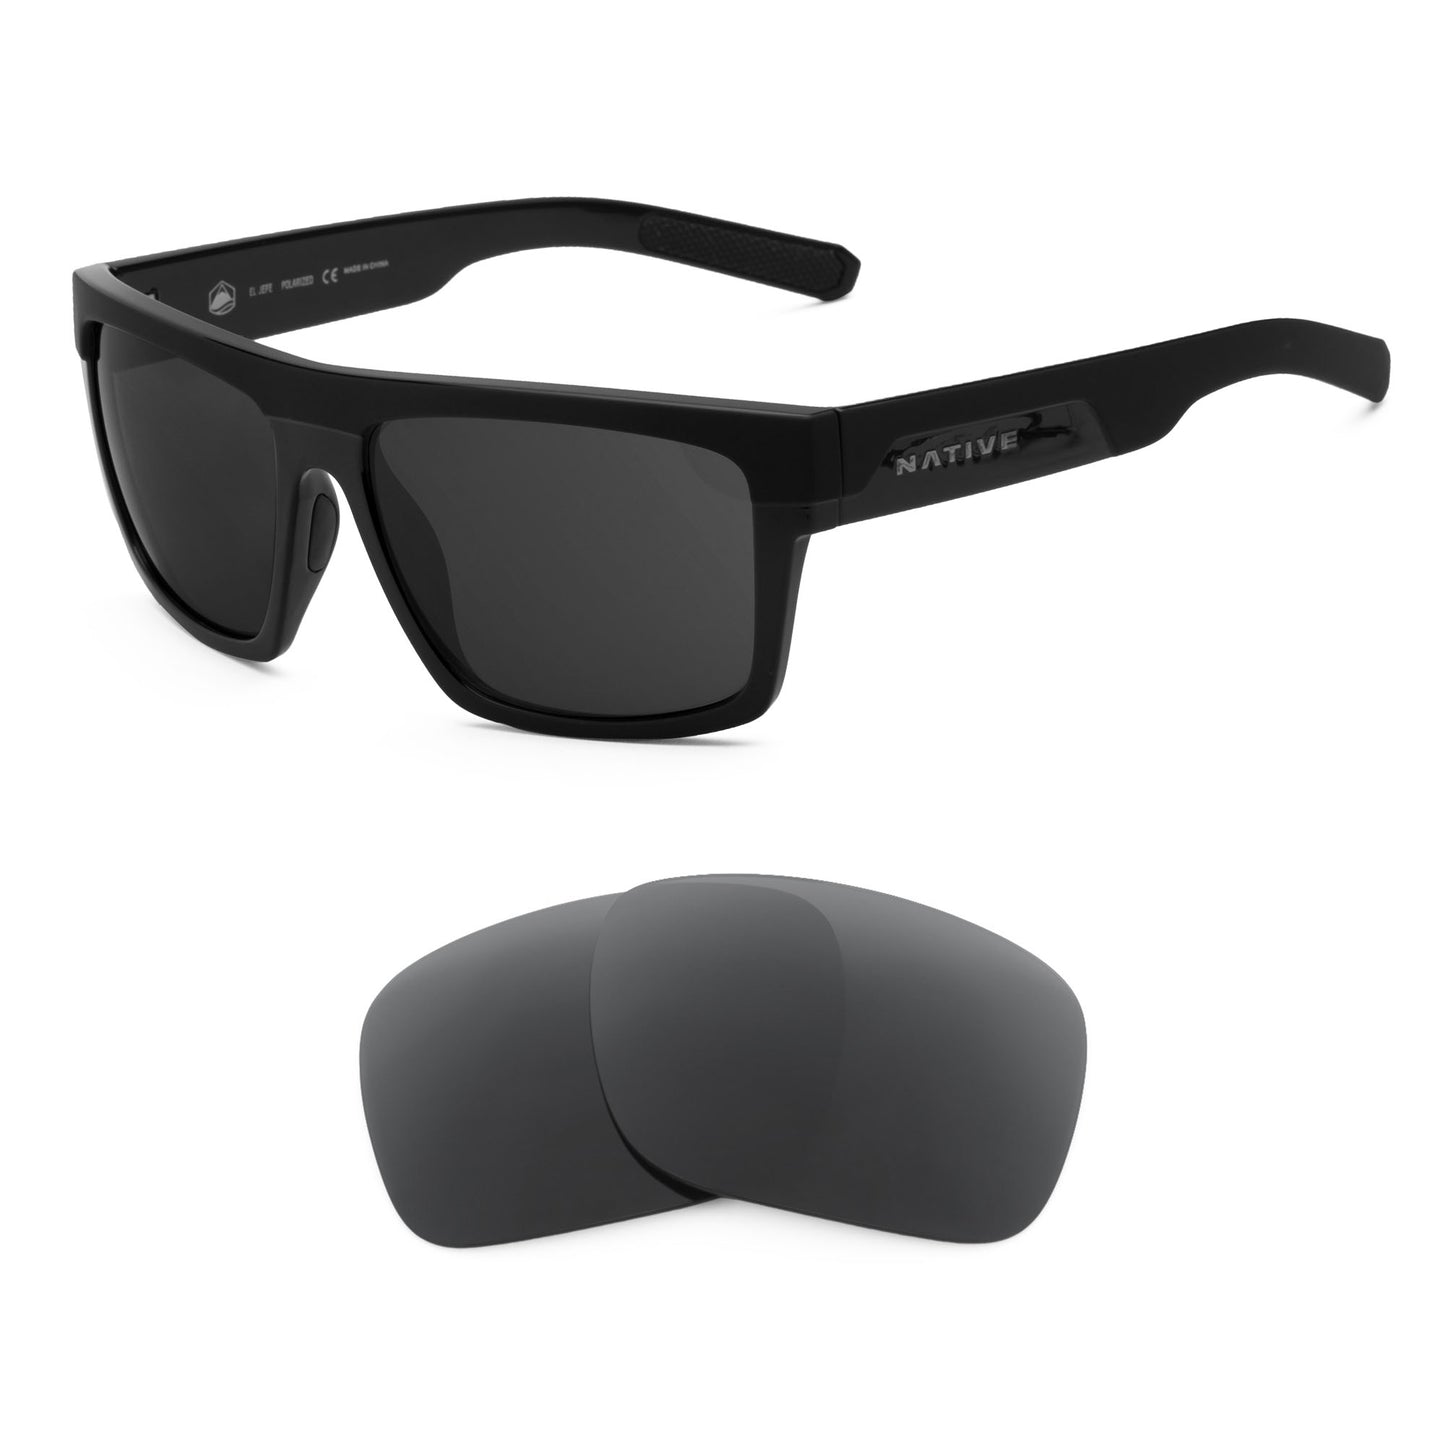 Native El Jefe sunglasses with replacement lenses